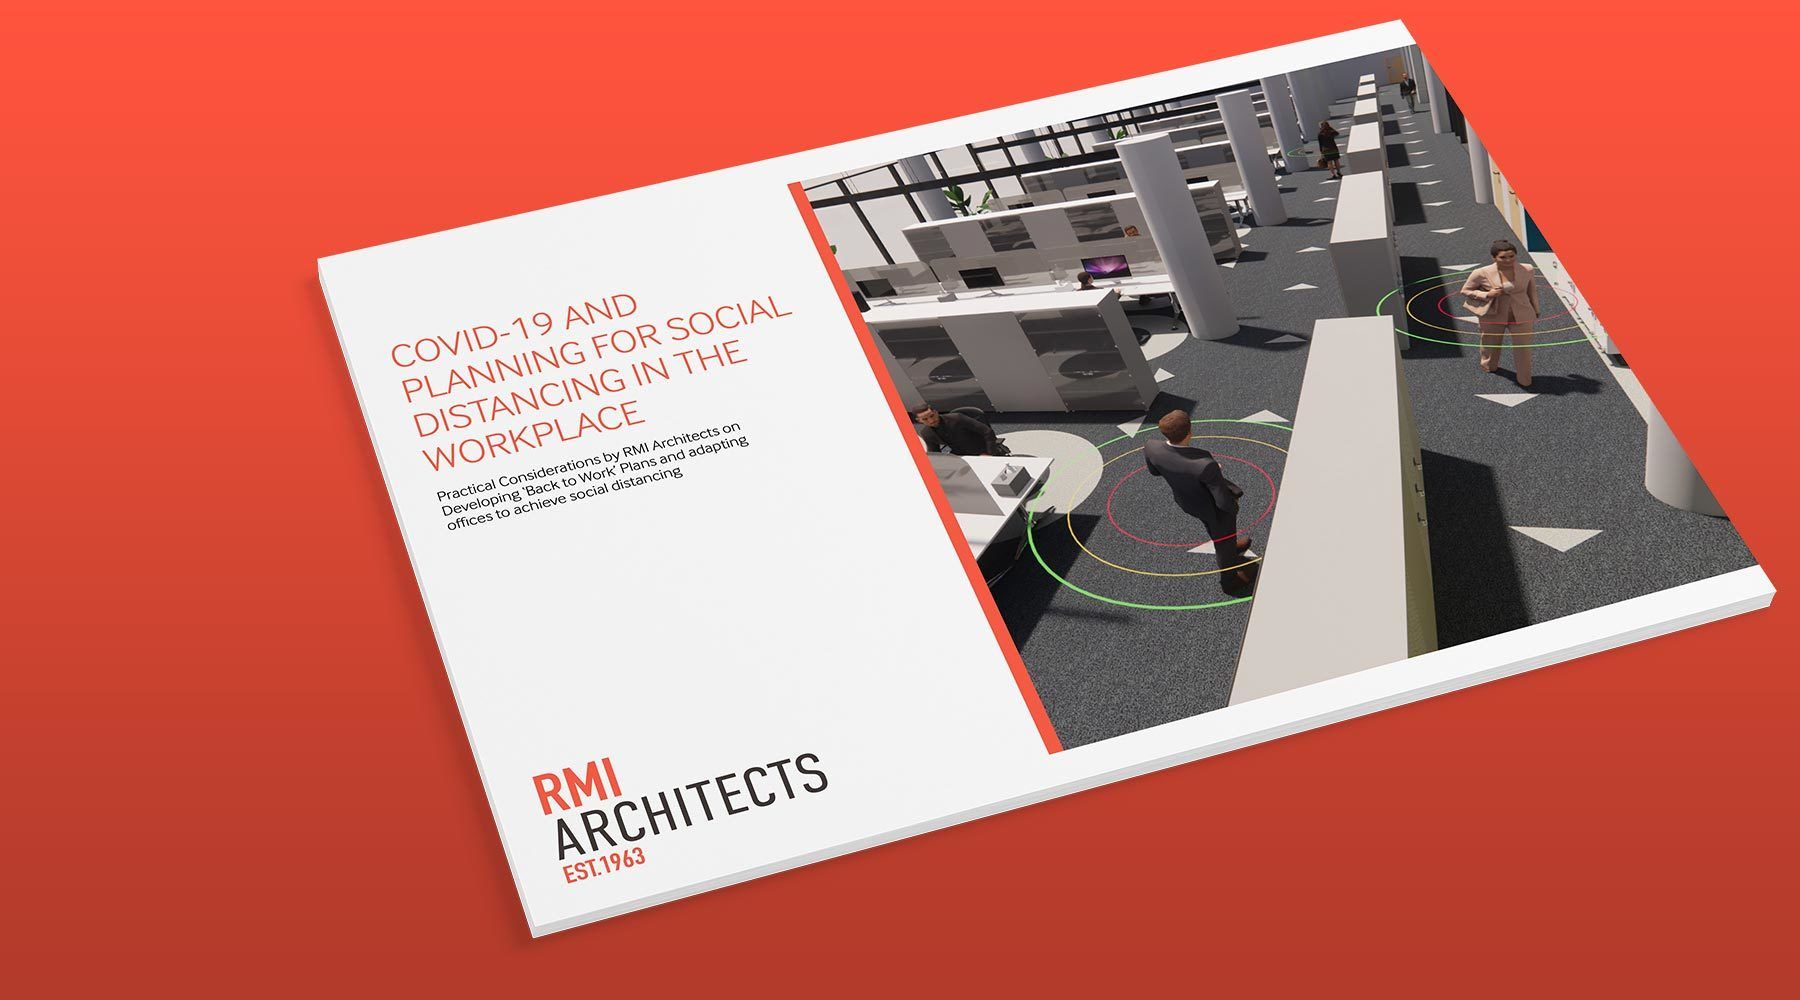 SPATIAL PLANNING FOR SOCIAL DISTANCING IN THE WORKPLACE document